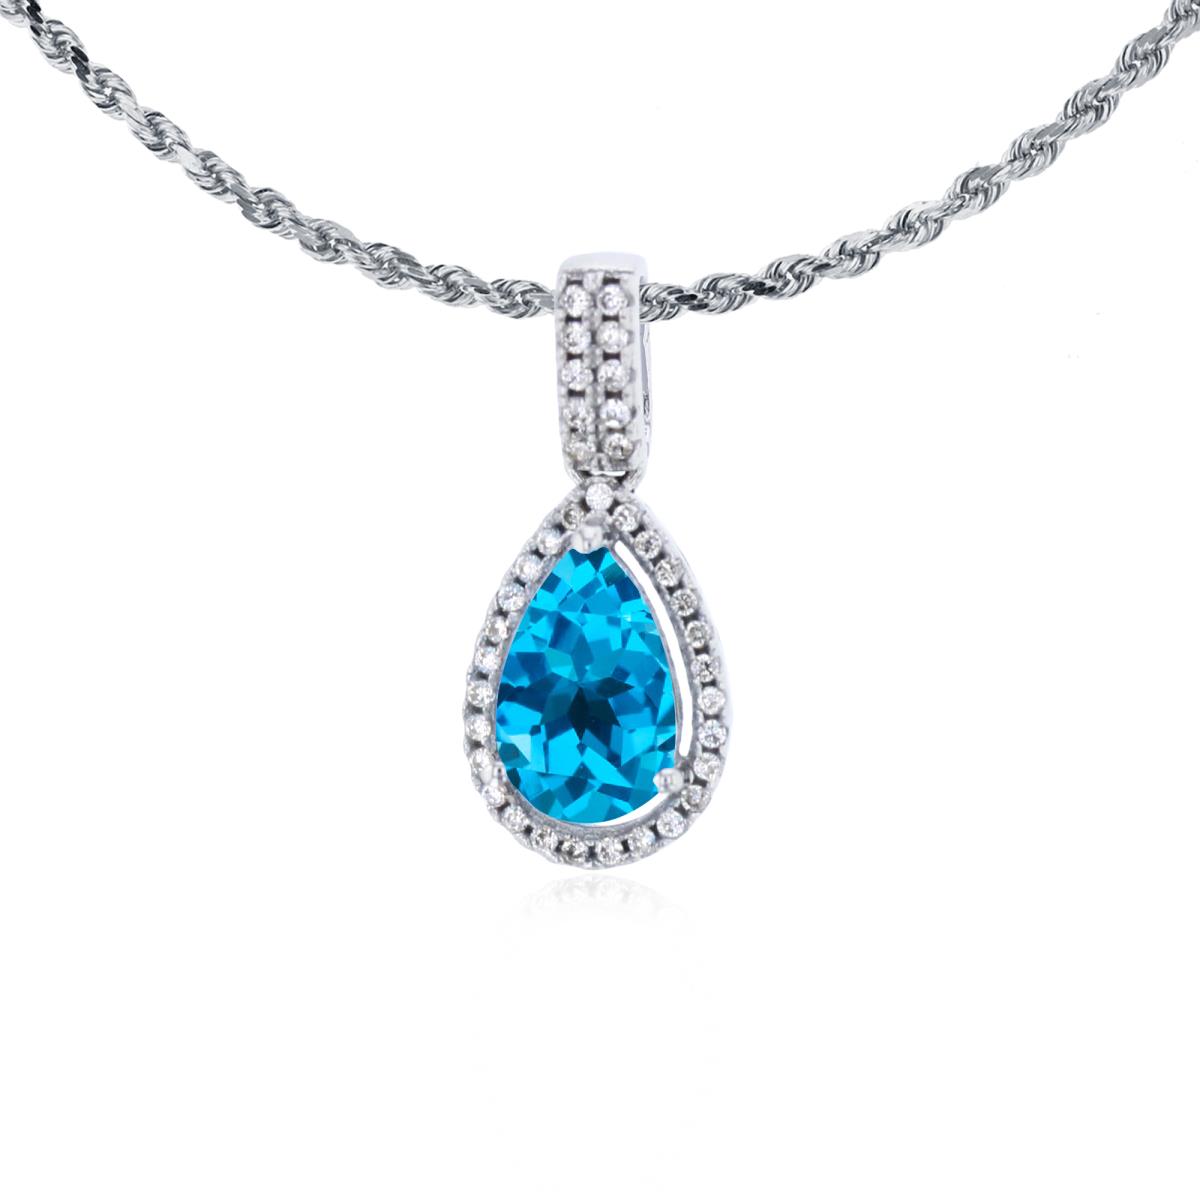 14K White Gold 8x5mm Pear Cut Swiss Blue Topaz & 0.11 CTTW Diamond Halo 18" Rope Chain Necklace